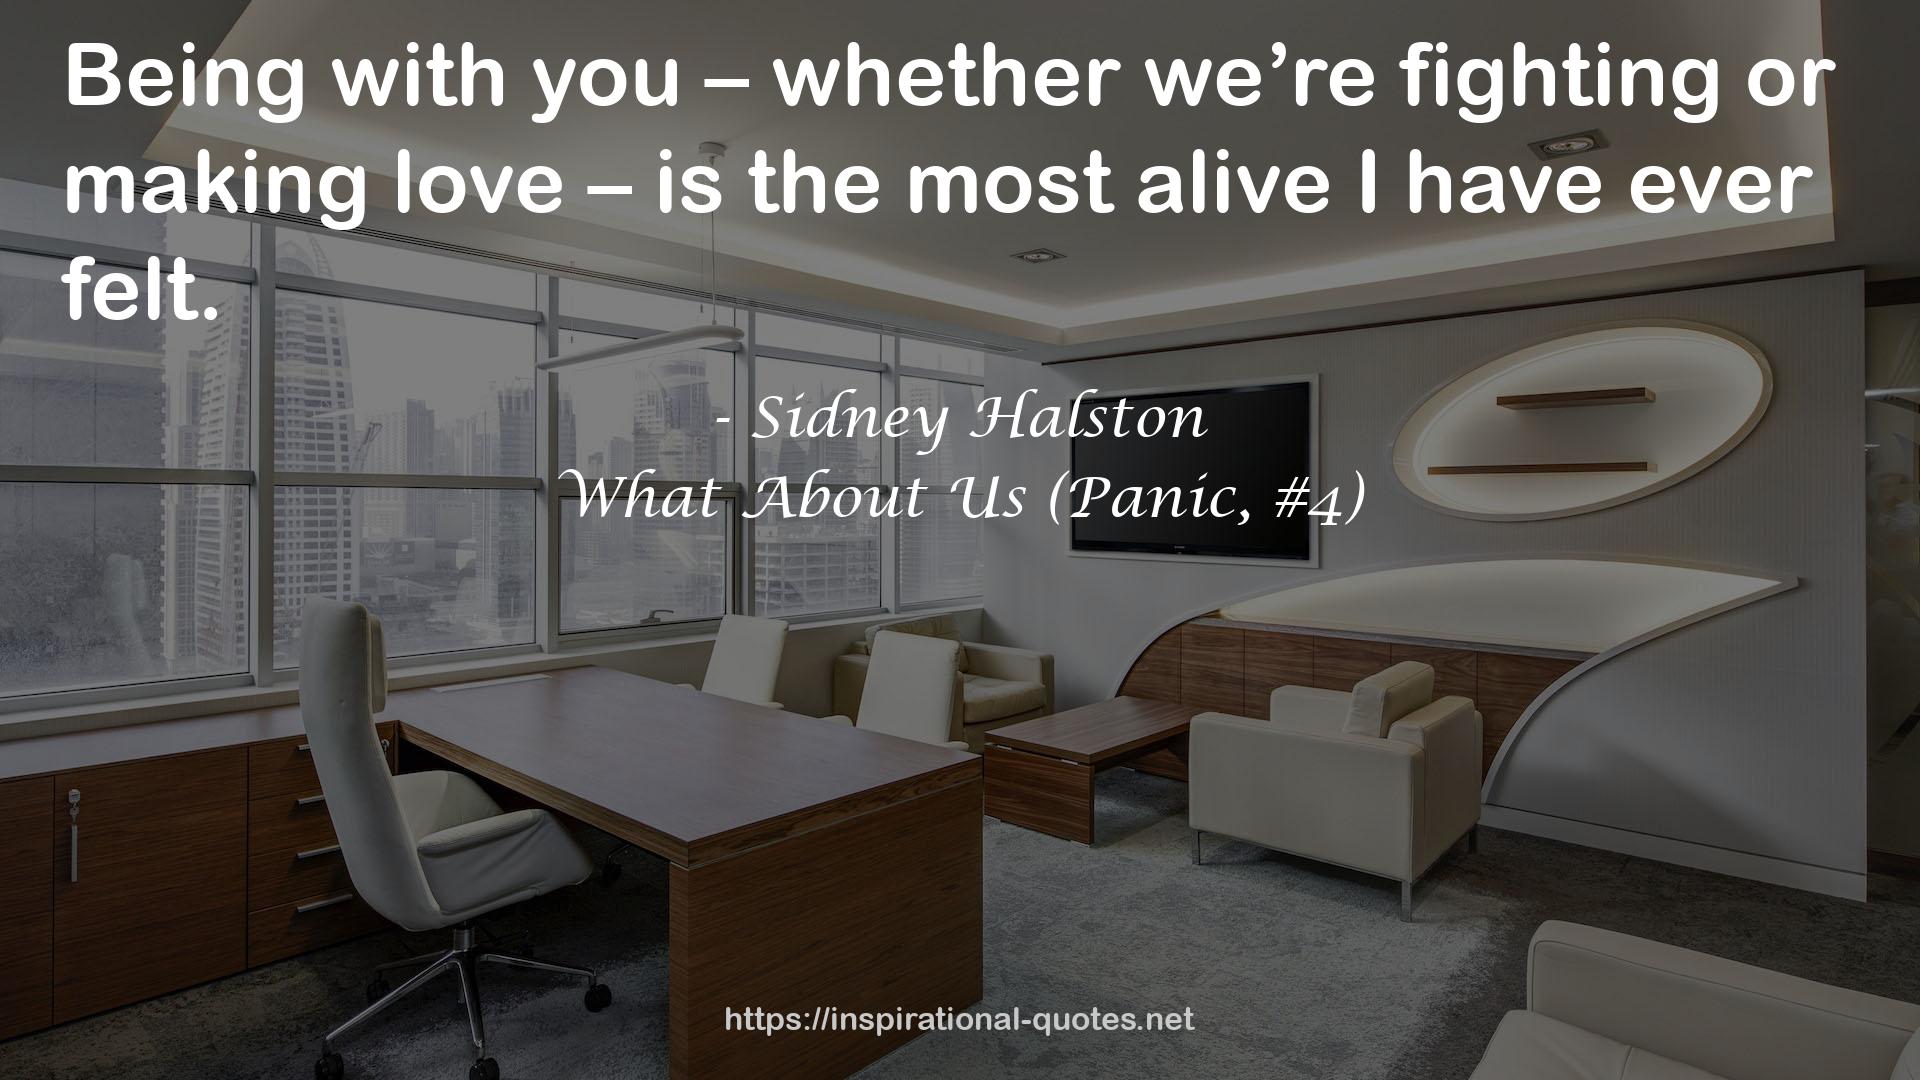 What About Us (Panic, #4) QUOTES